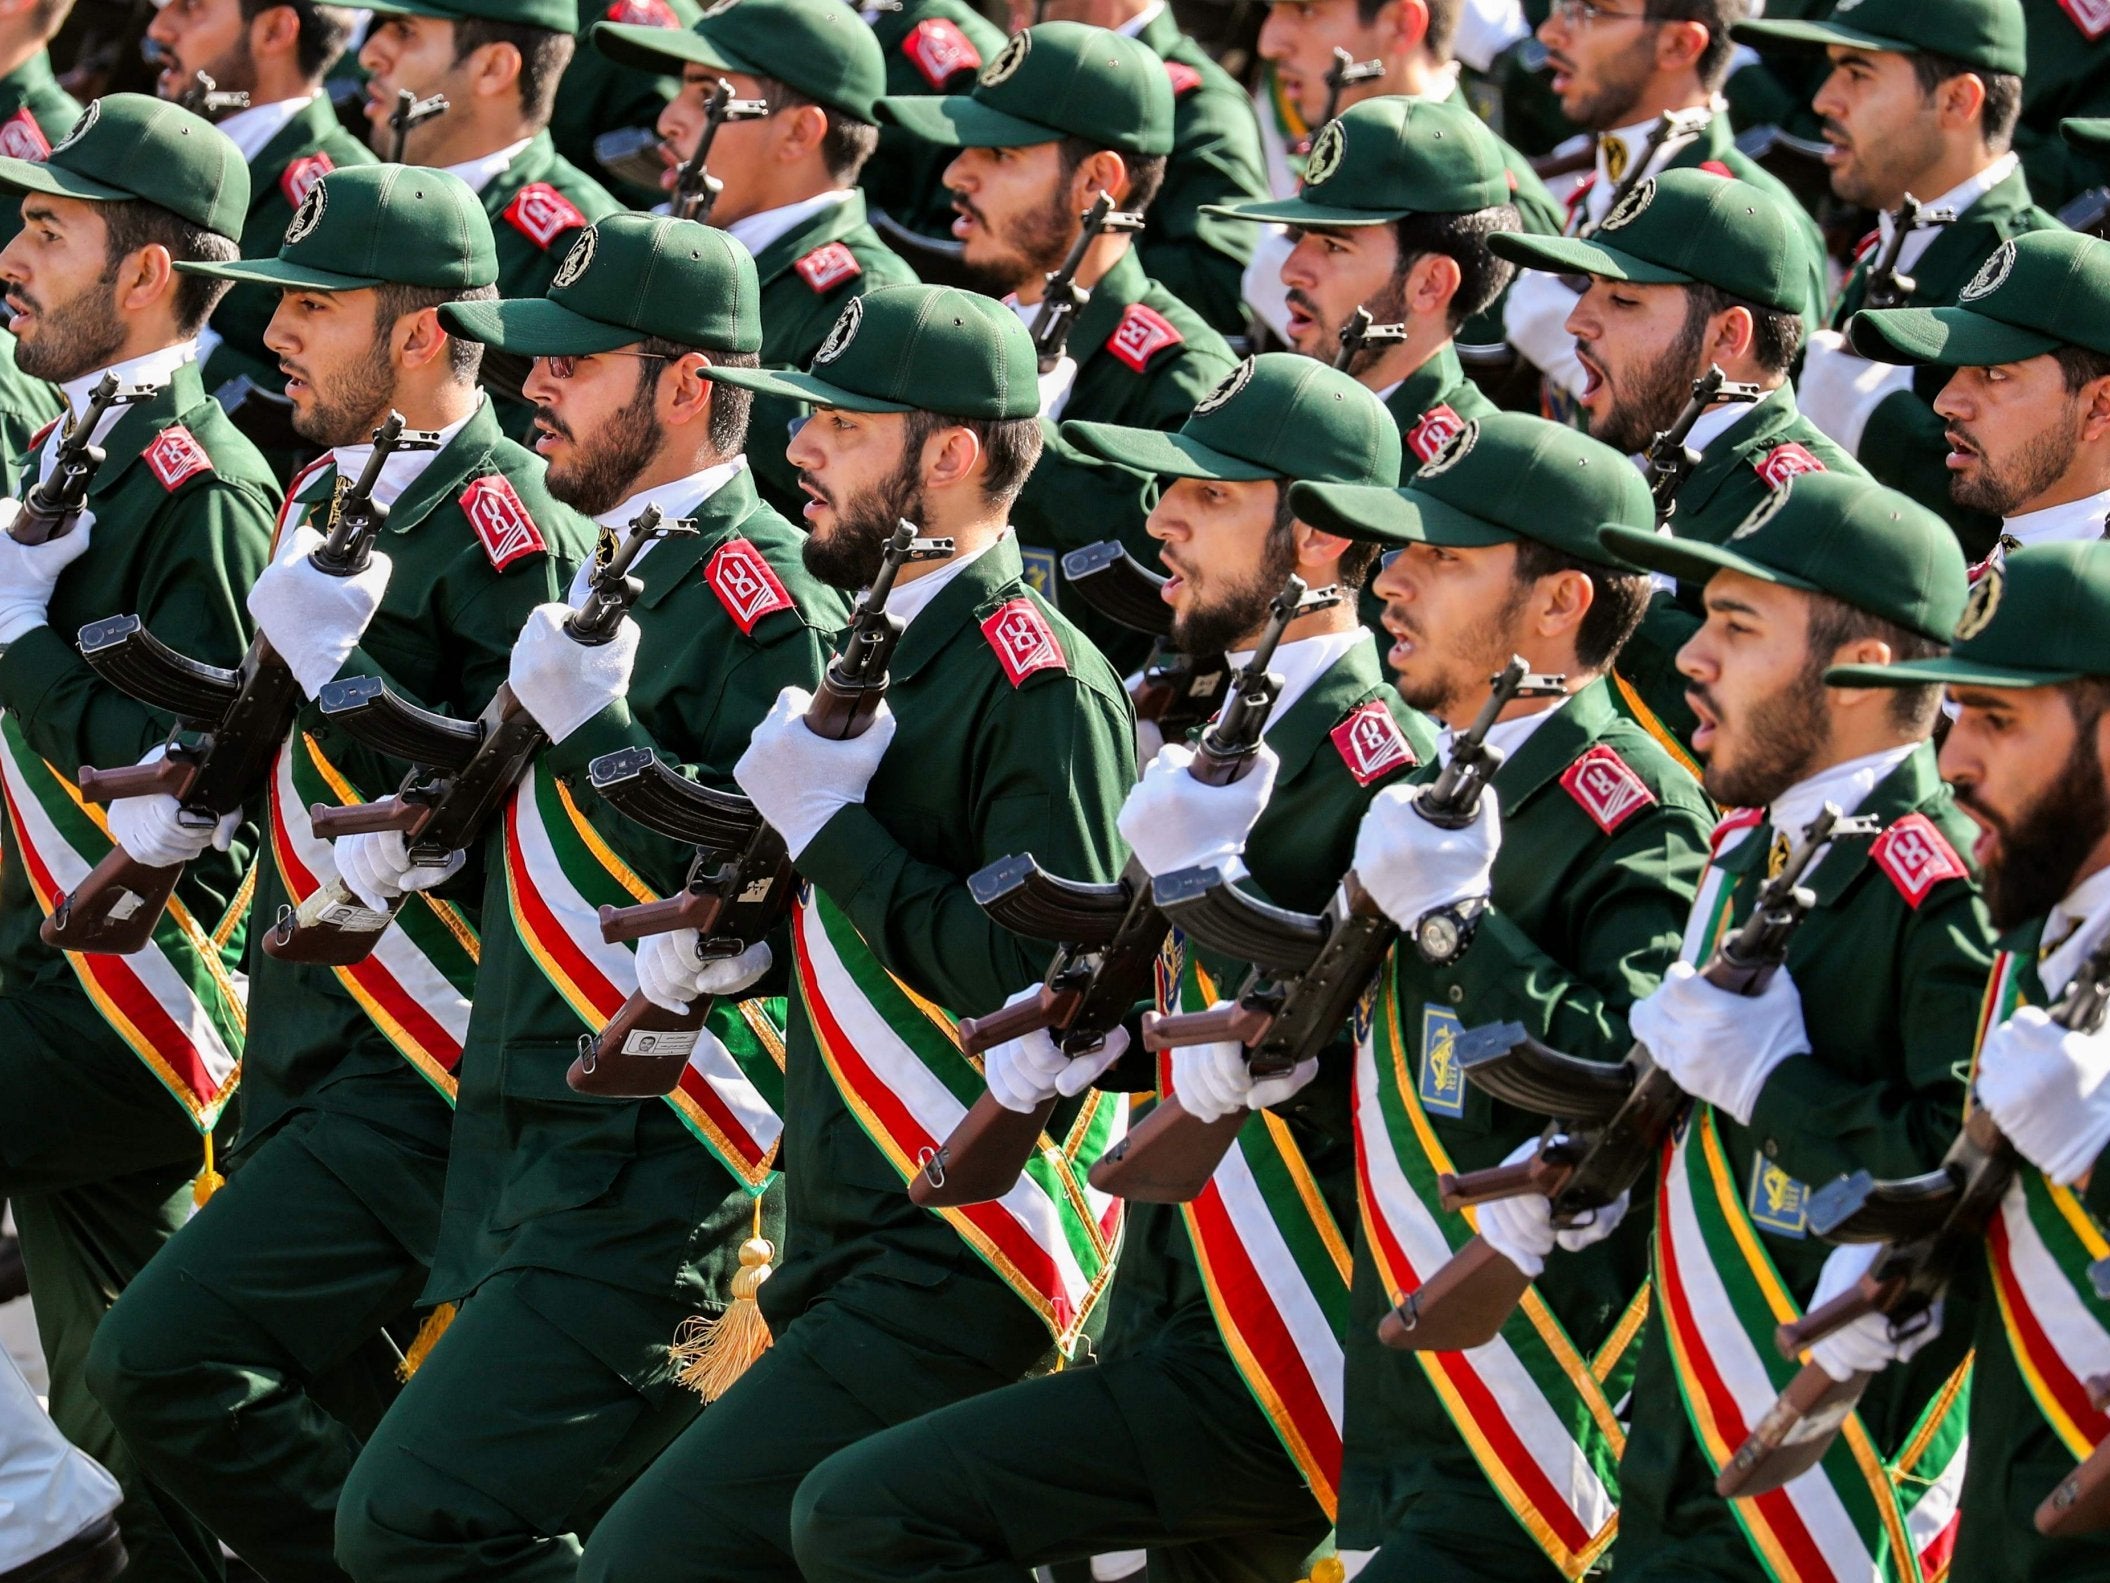 Members of Iran's Revolutionary Guards Corps (IRGC) march during the annual military parade marking the anniversary of the outbreak of the devastating 1980-1988 war with Saddam Hussein's Iraq, in the capital Tehran